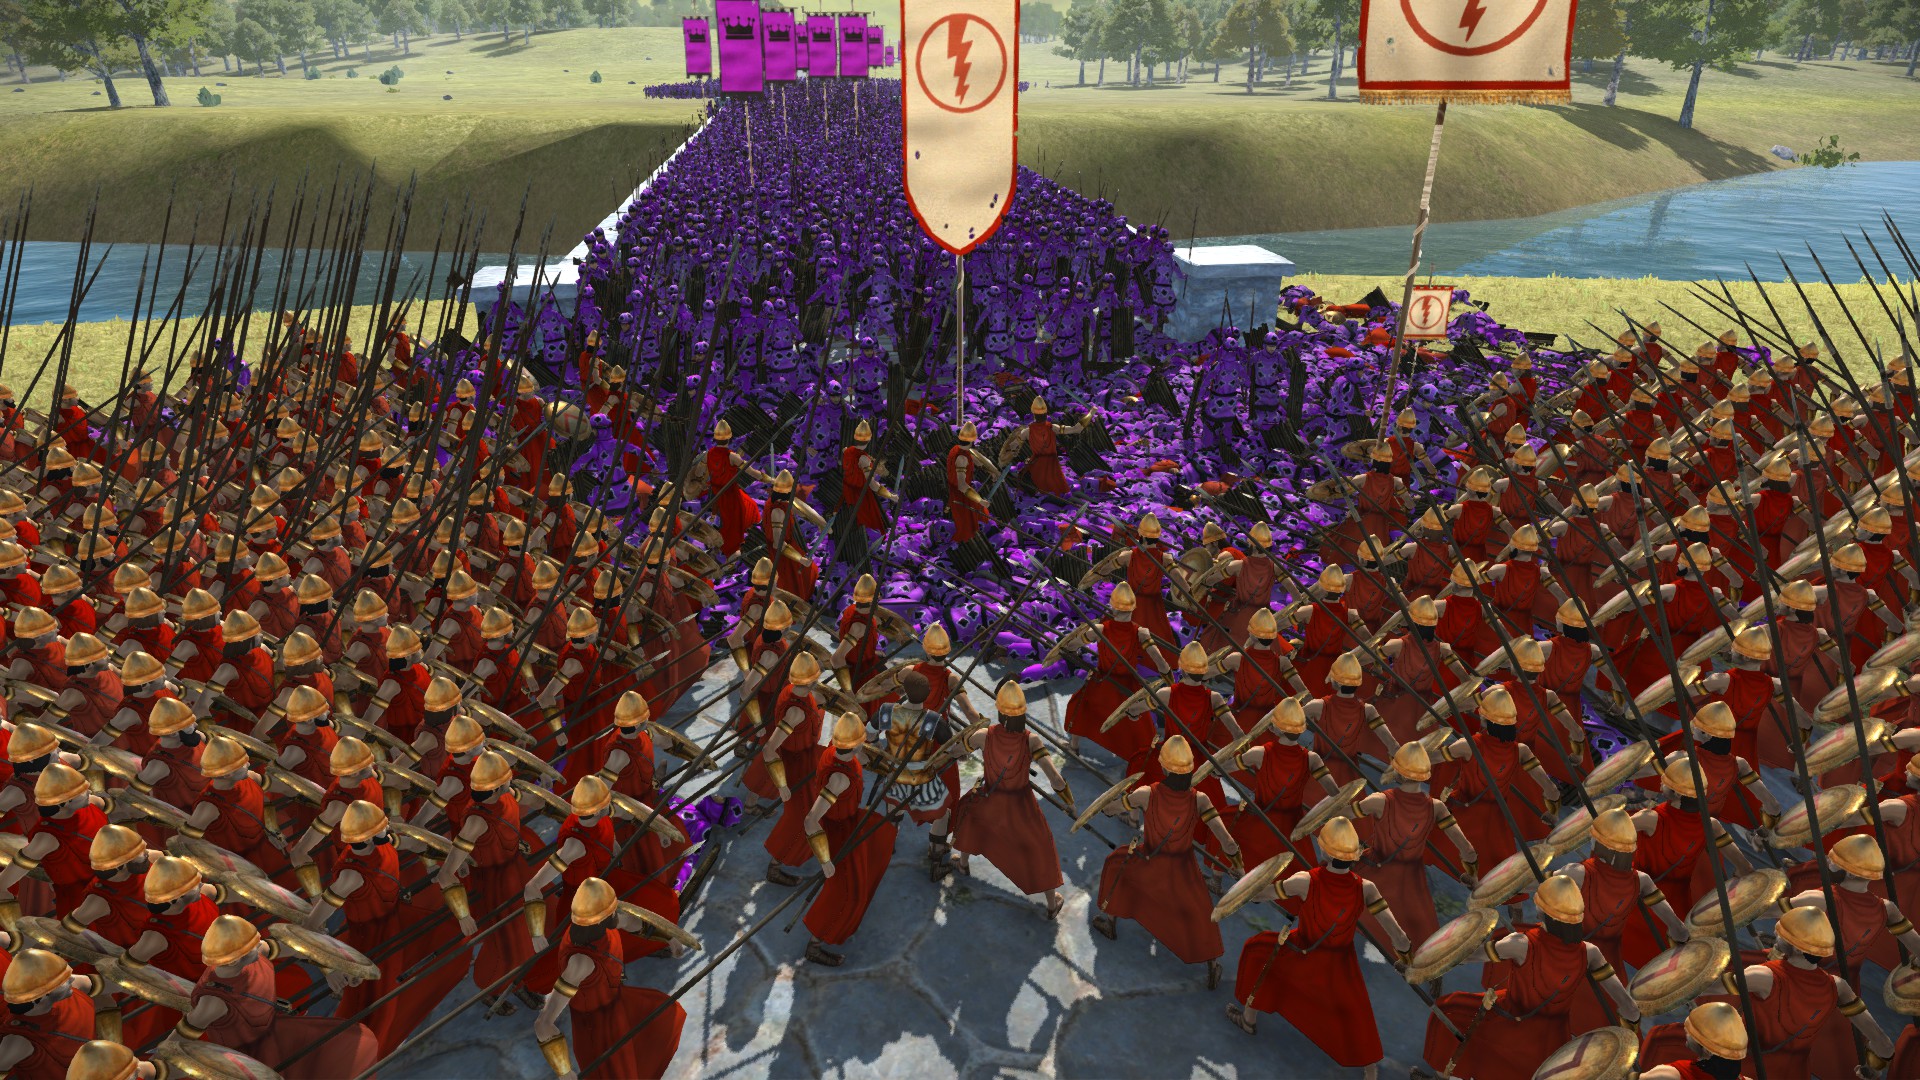 total war rome remastered guide